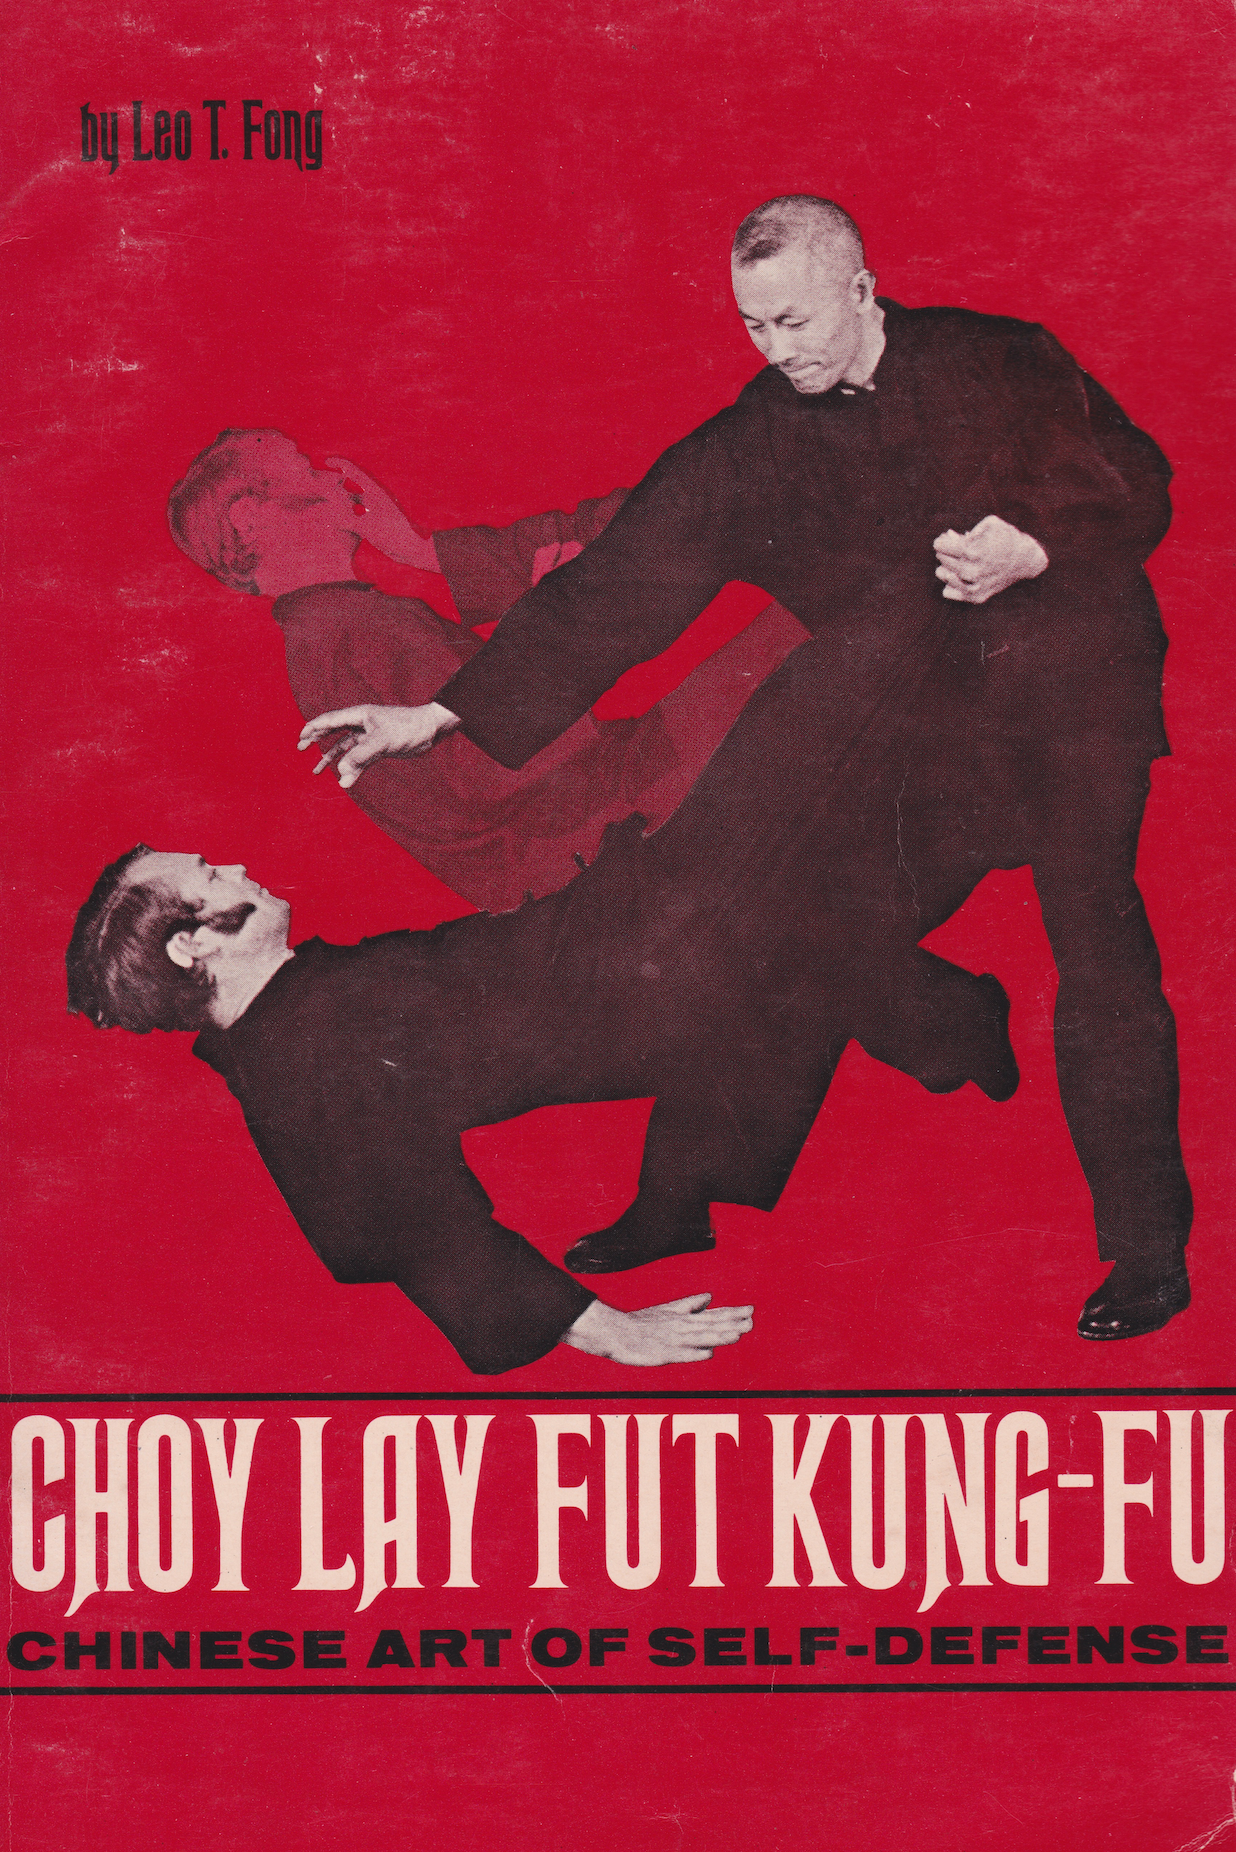 Choy Lay Fut Kung-Fu: Chinese Art of Self-Defense Book by Leo Fong (Preowned)